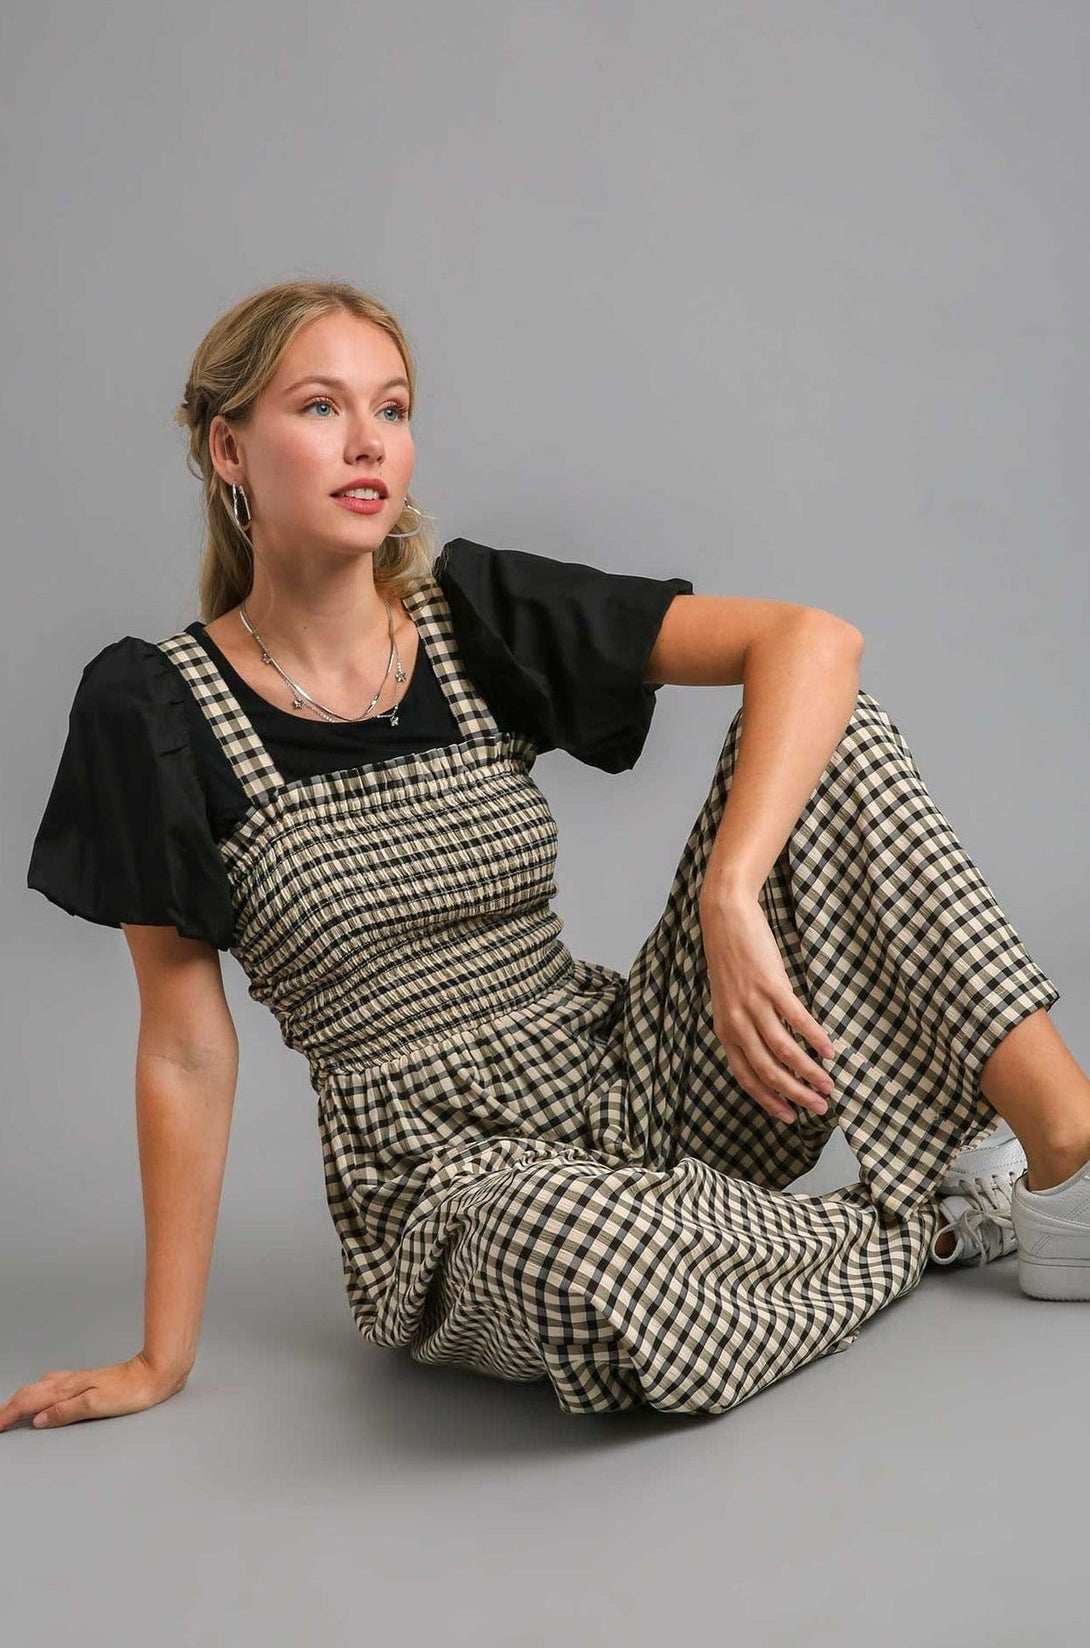 Umgee Gingham Smocked Jumpsuit with Front Pockets